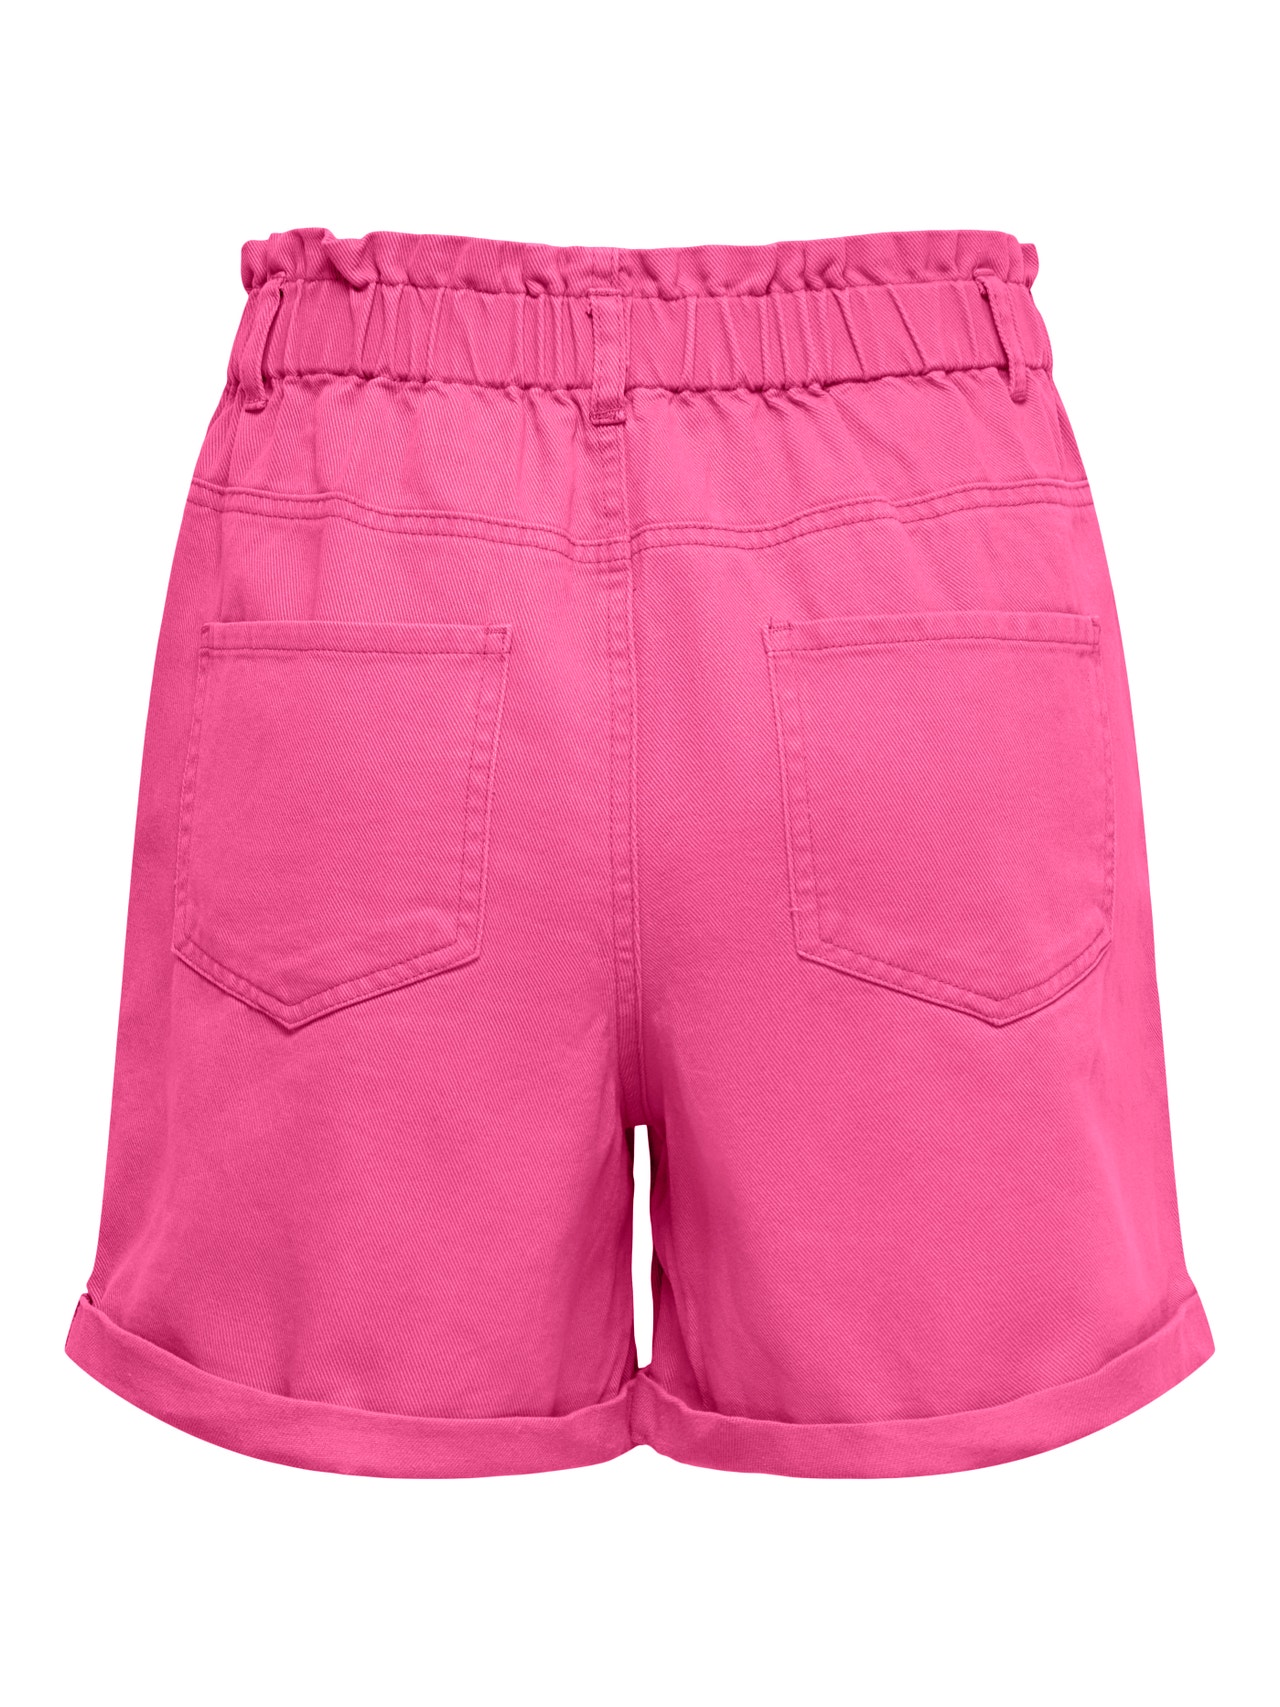 ONLY Loose Fit High waist Fold-up hems Shorts -Carmine Rose - 15257540